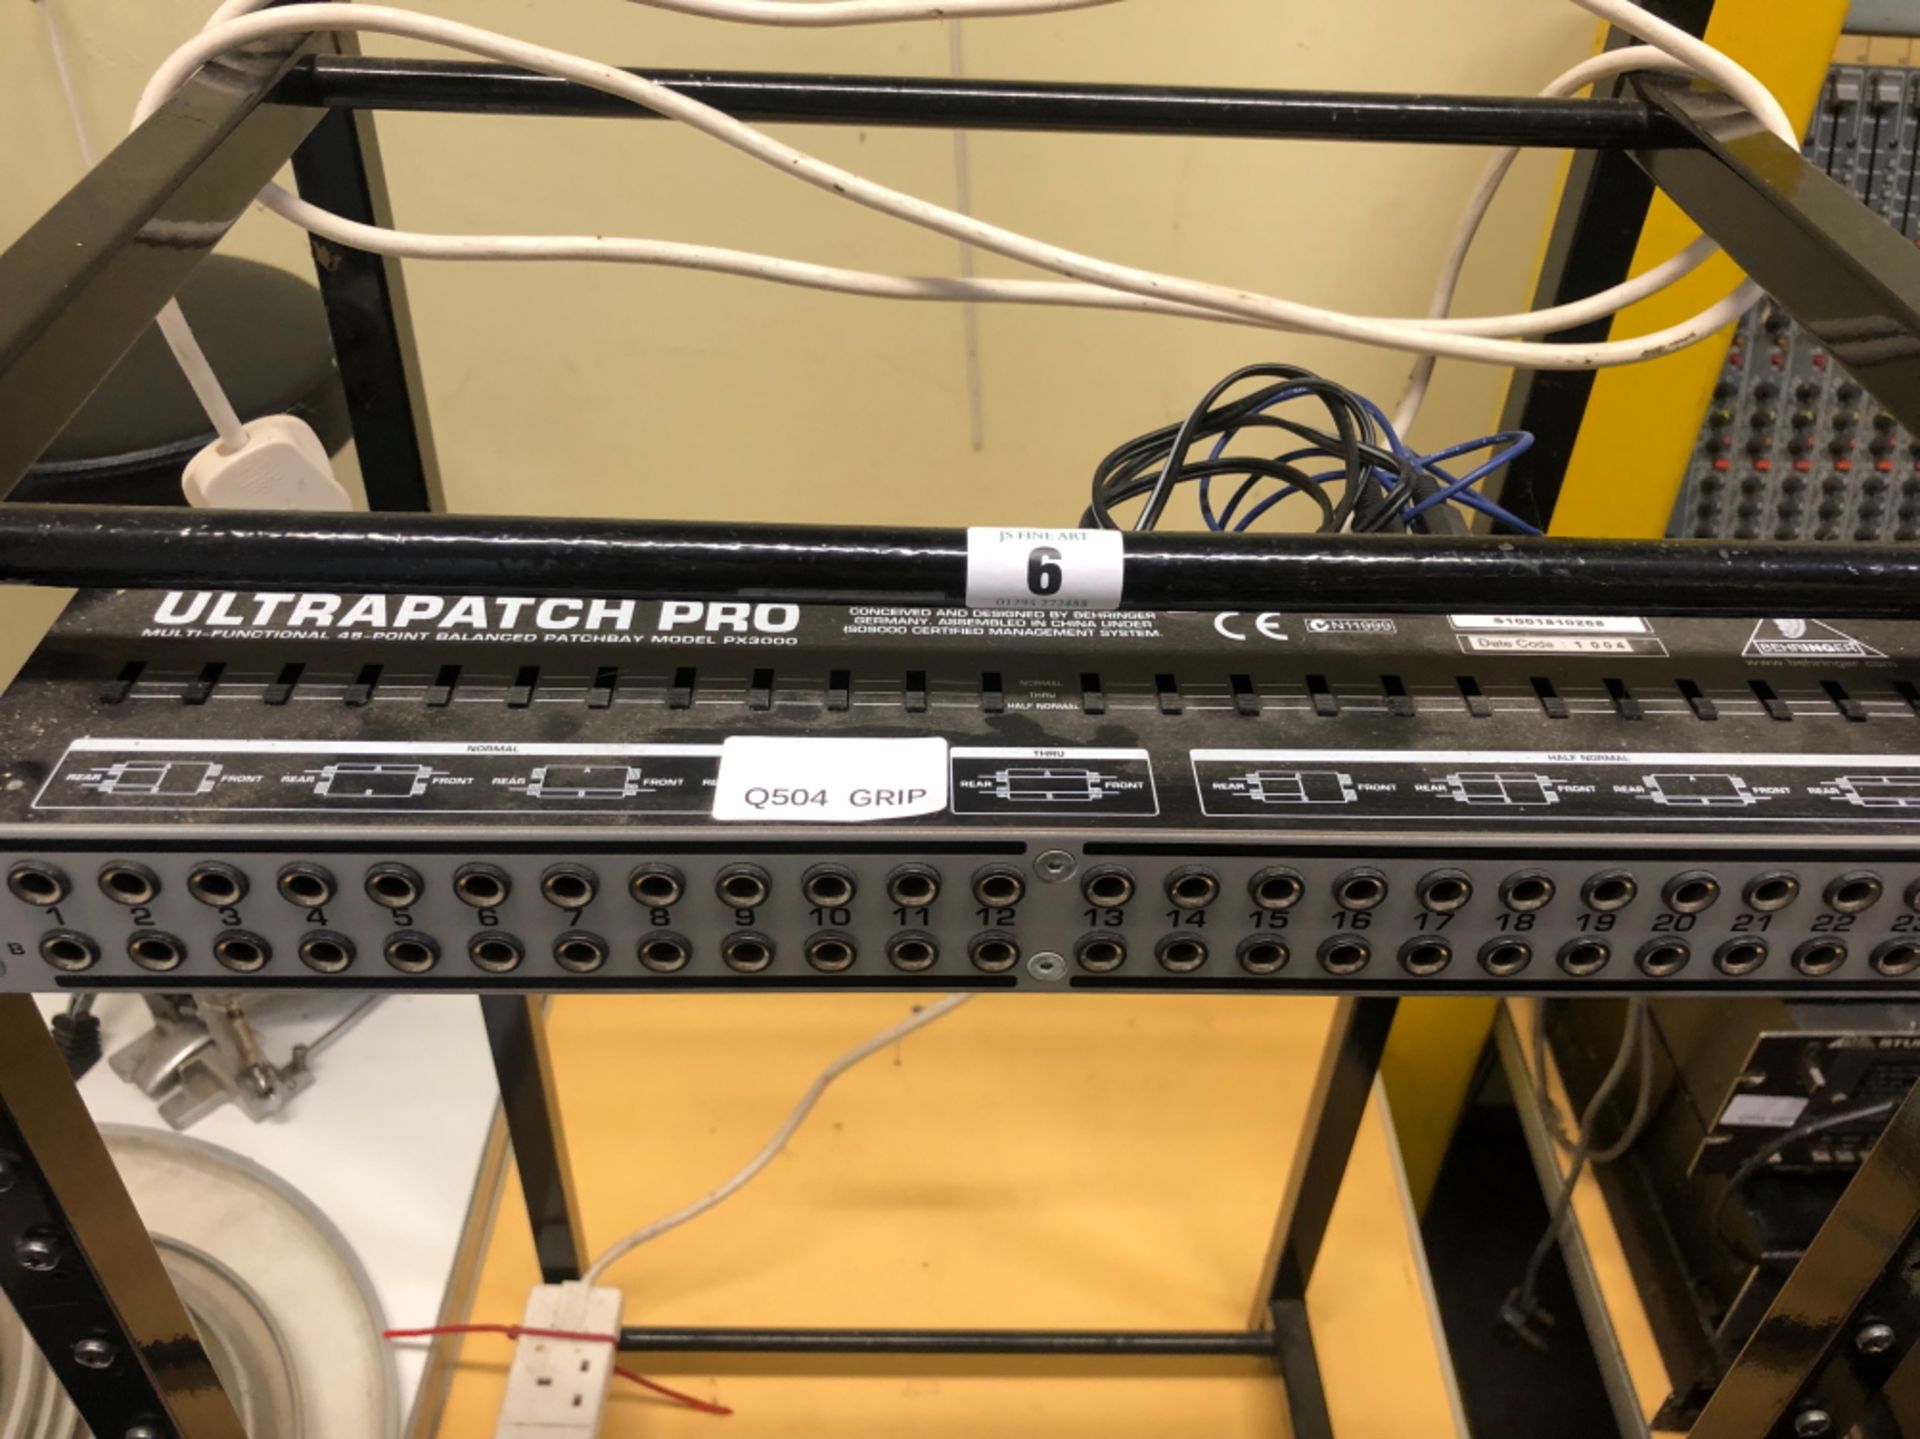 RACK MOUNT/STAND WITH BEHRINGER - ULTRA PATCH PRO 48 POINT PATCHBAY 51 x x 91 x 38 cms, MODEL - Image 3 of 8